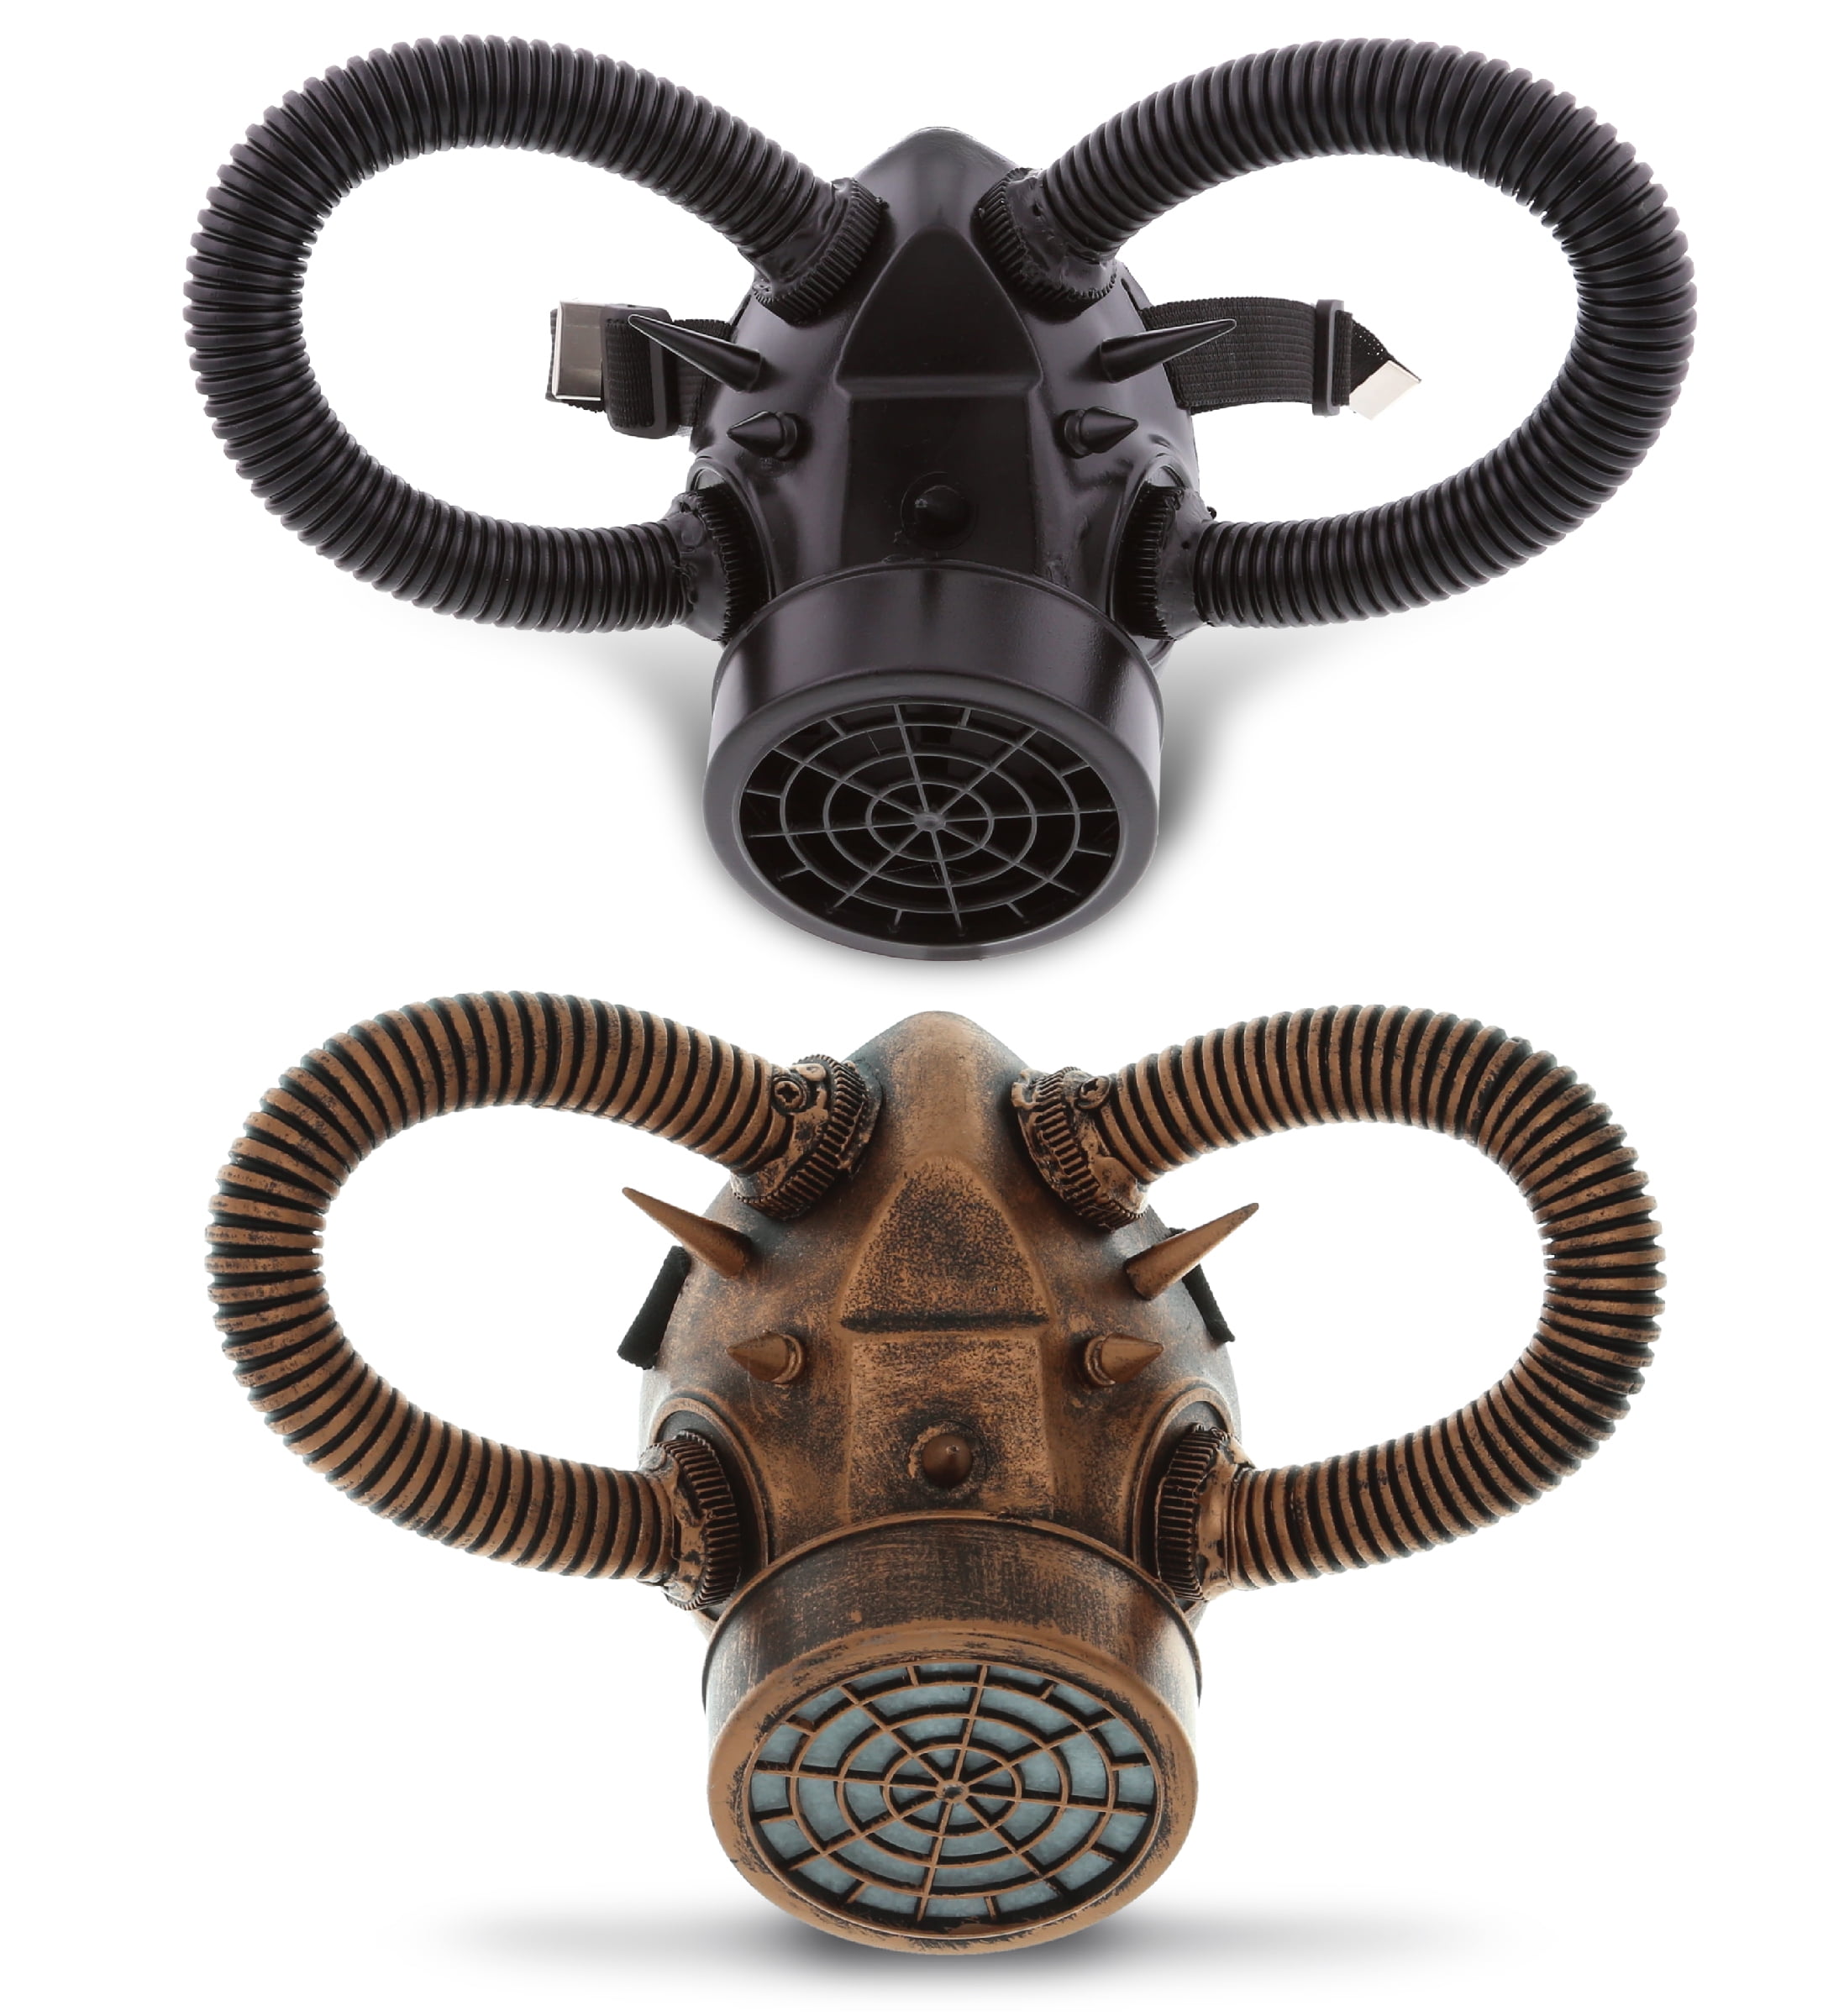 Attitude Studio Black & Copper Gas Masks Set of 2 - Steampunk Masks with Respirator for Men & Women, Gas Mask Cosplay Accessories Conventions, Halloween Parties, and Special Themed Events -